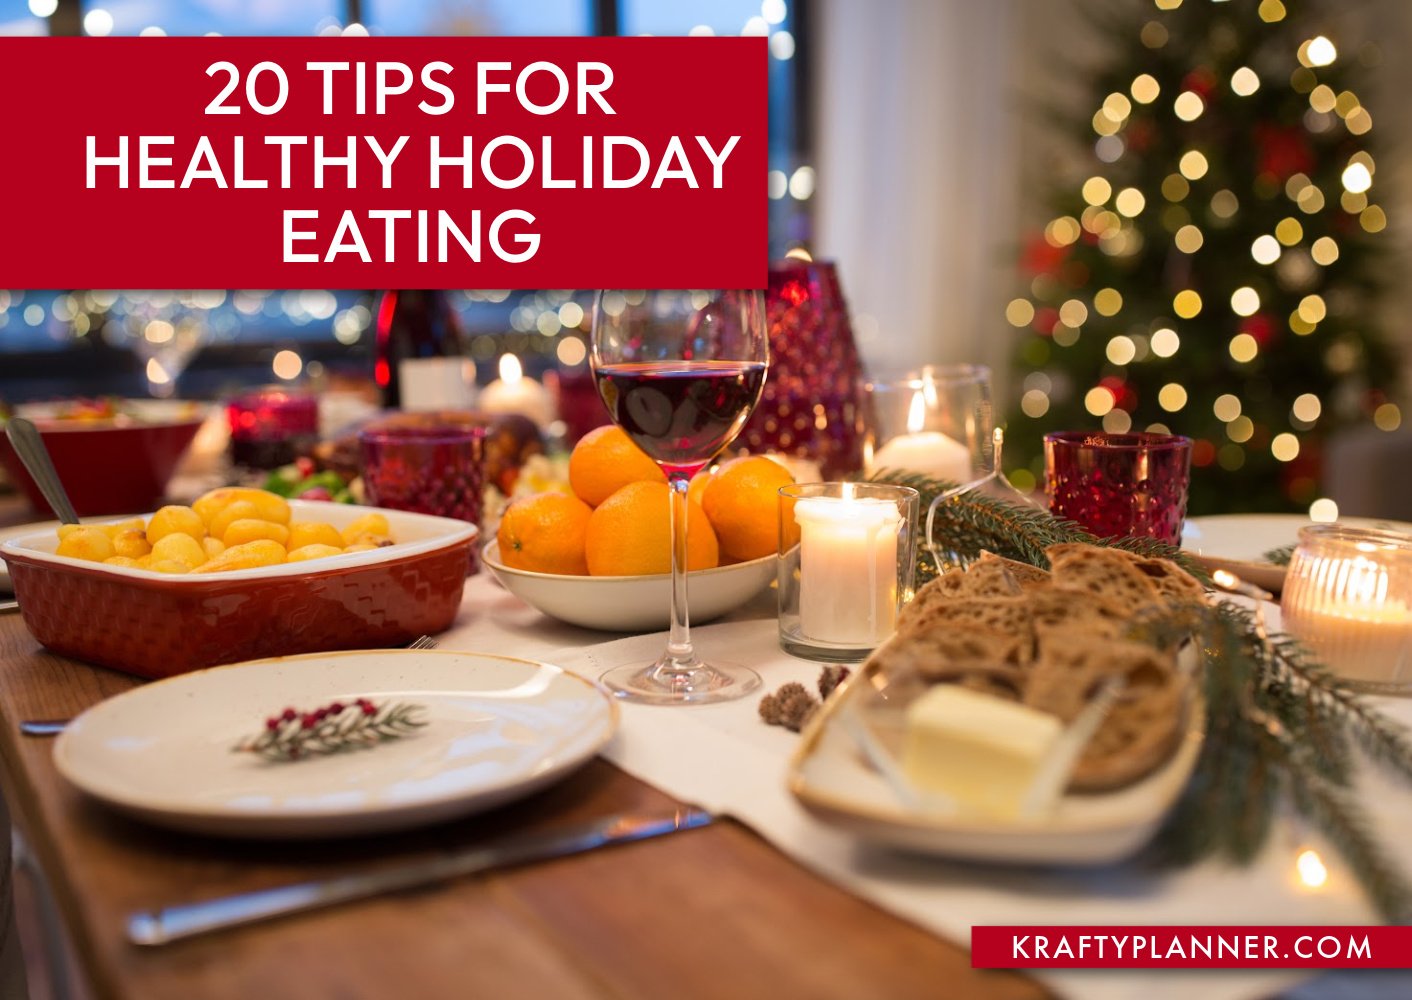 20 Tips for Healthy Holiday Eating